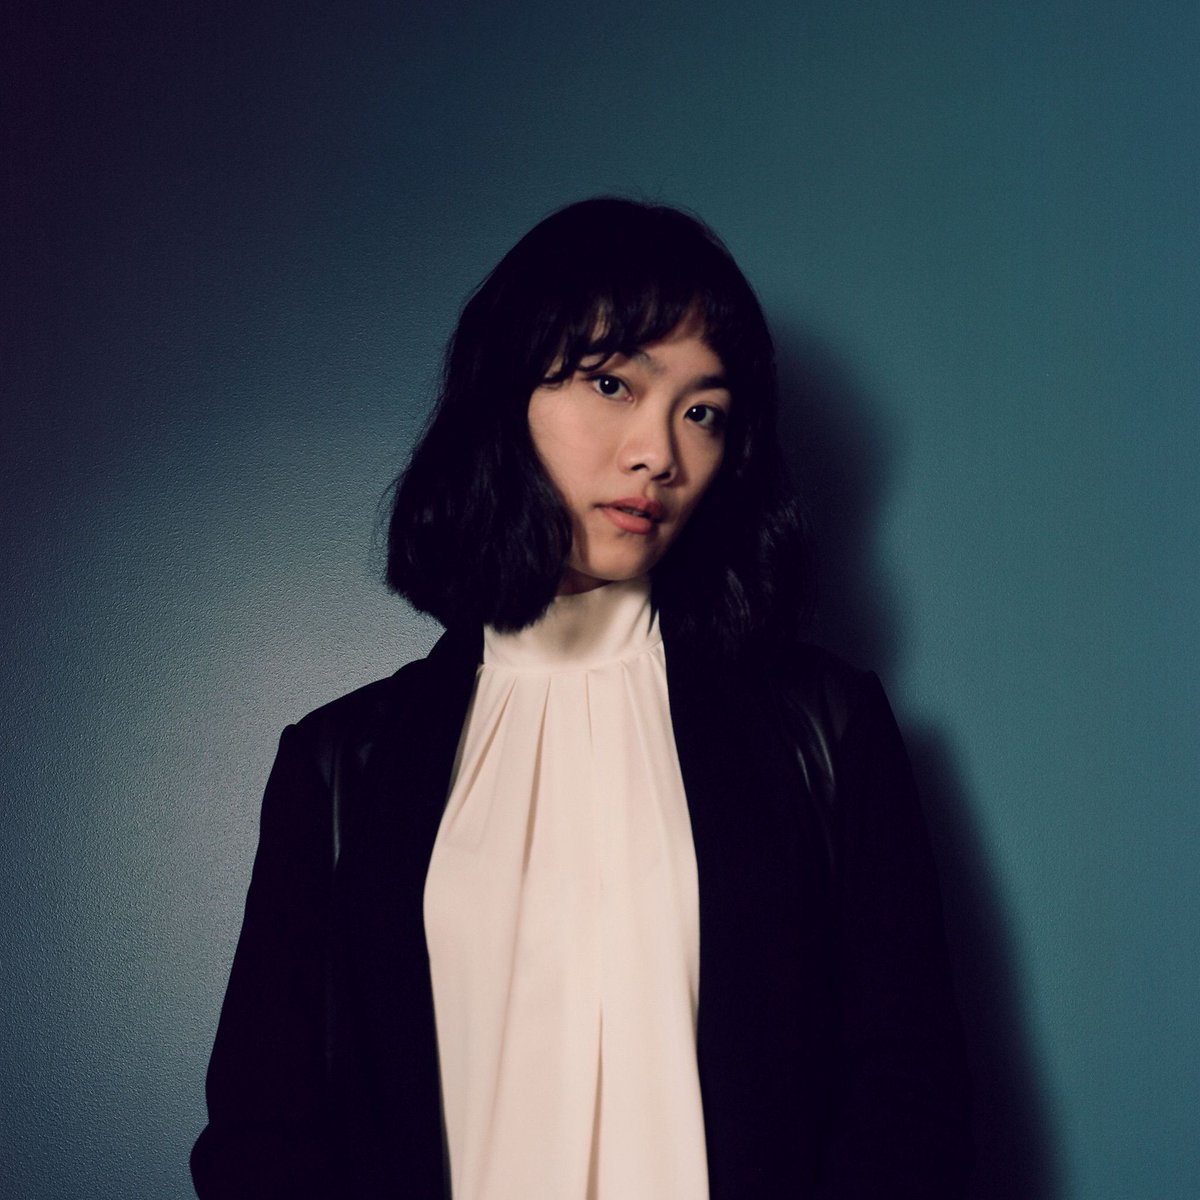 Askonas Holt is delighted to welcome Tiffany Poon to the roster for worldwide management. Read the full story here: buff.ly/3uDlrzk @Tiffanypianist